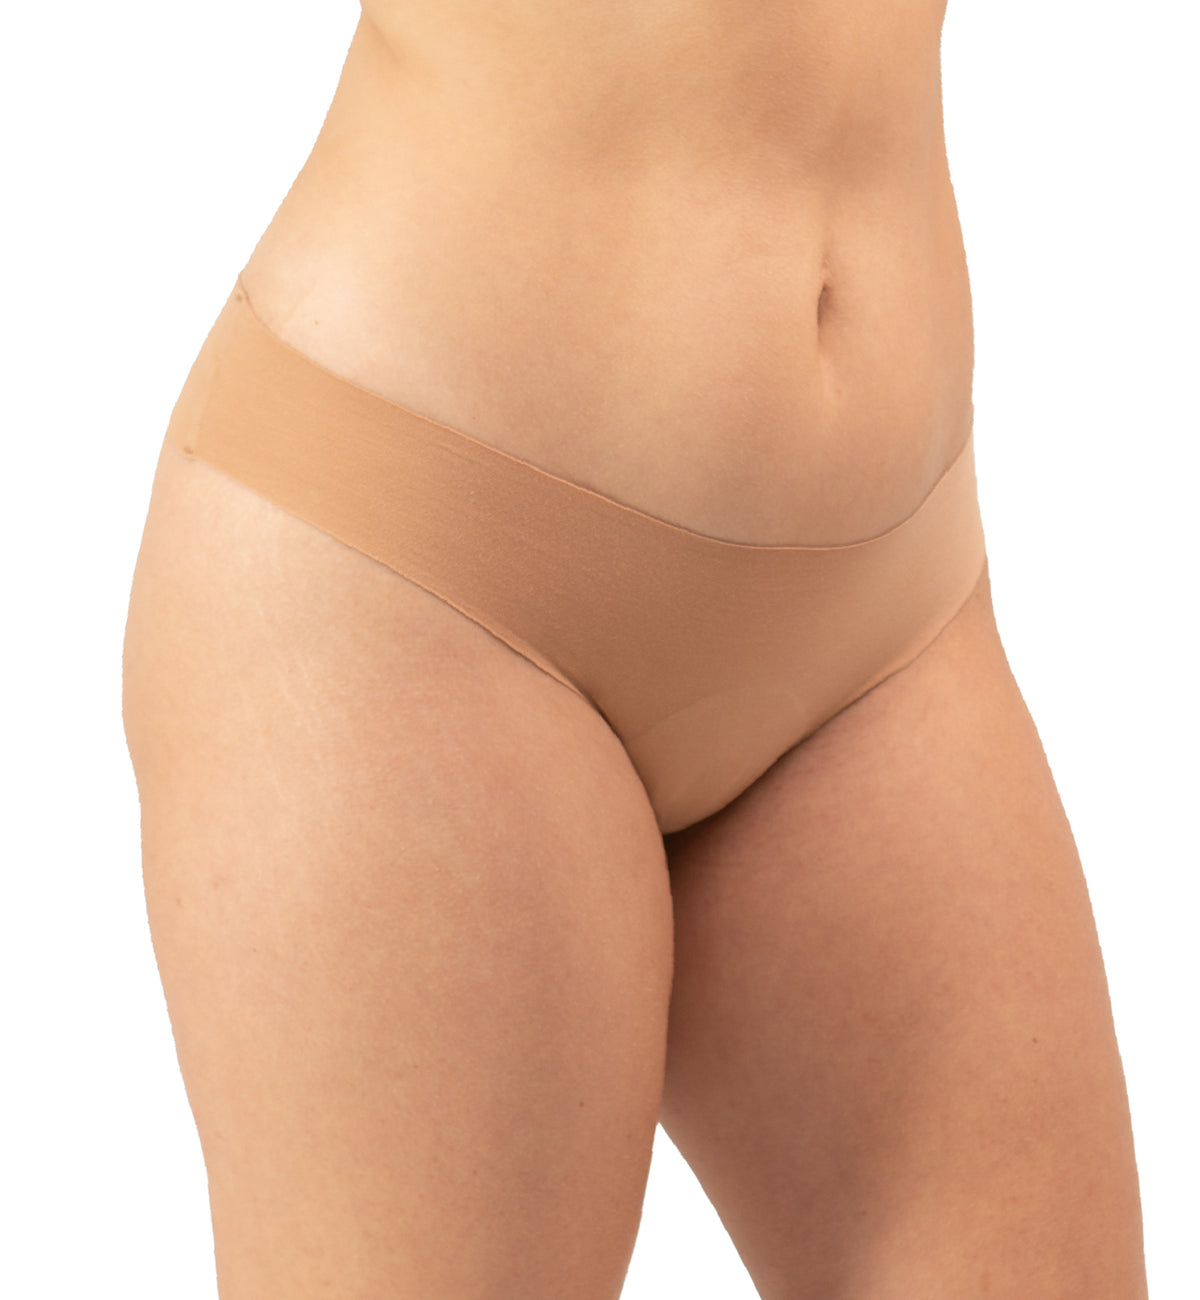 Panty Promise Low Rise Thong,XS,Sand - Sand,XS